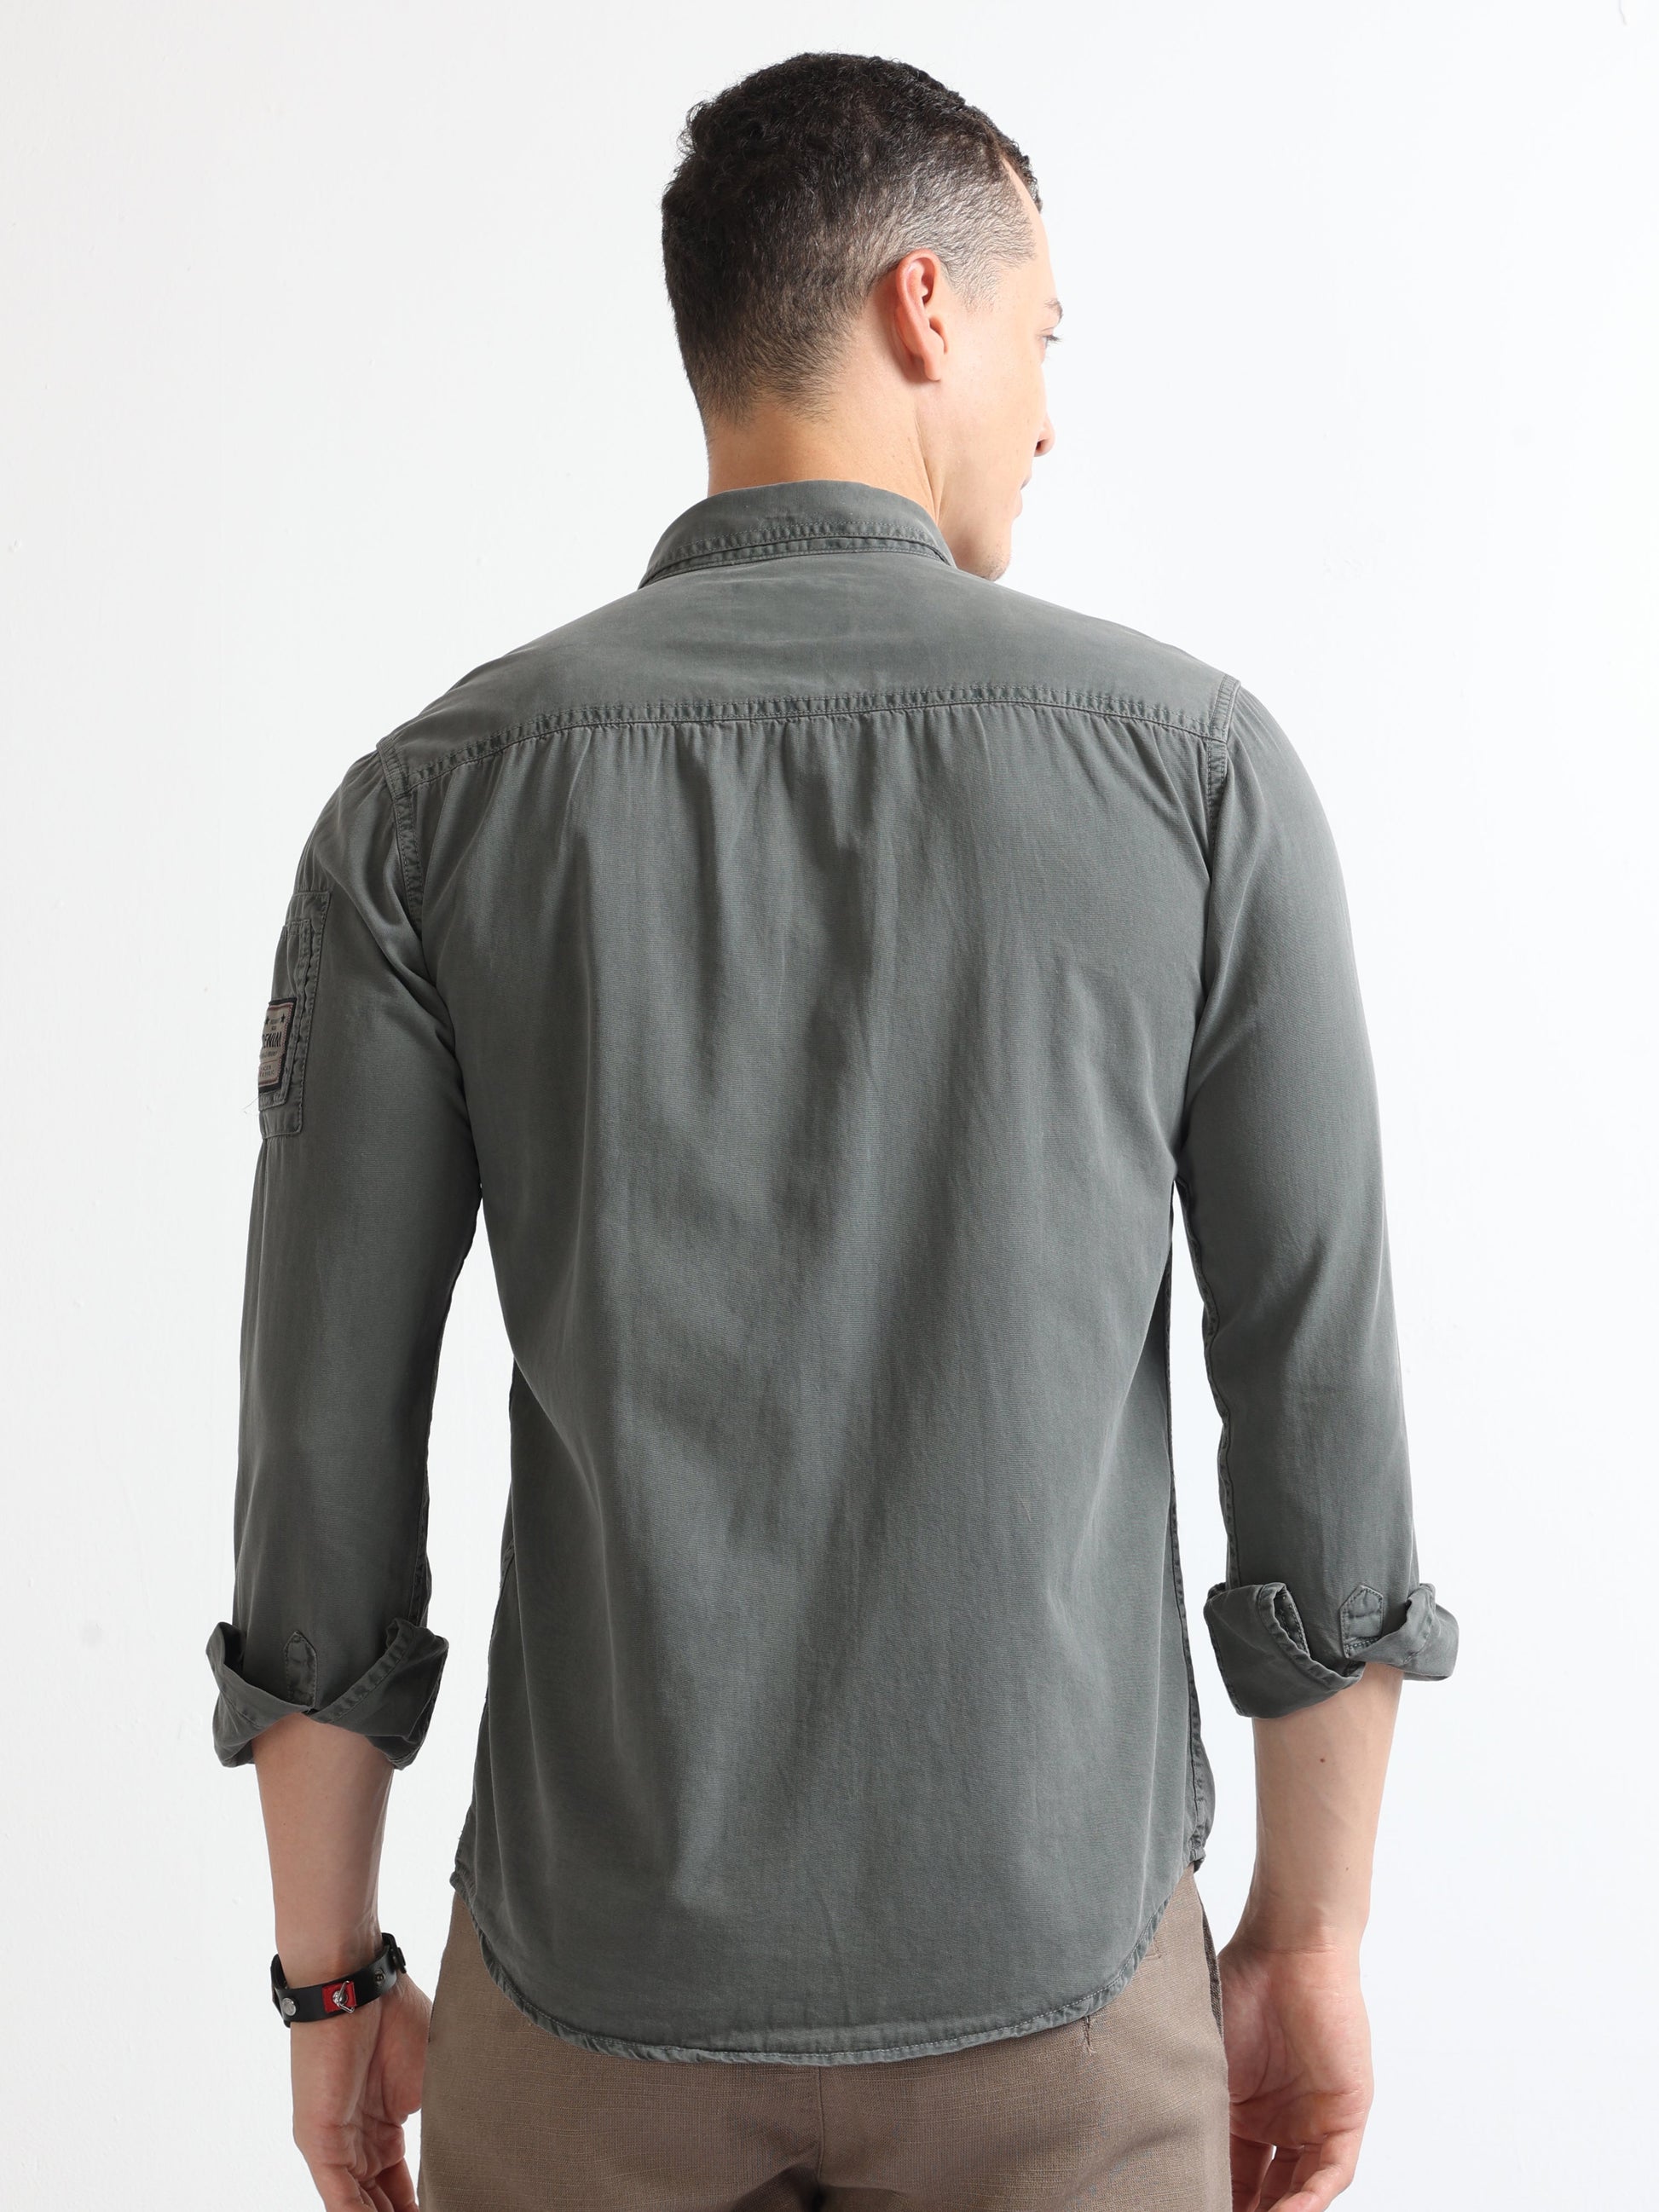 Buy Cut And Sew Rfd Double Pocket Stylish Shirt Online.